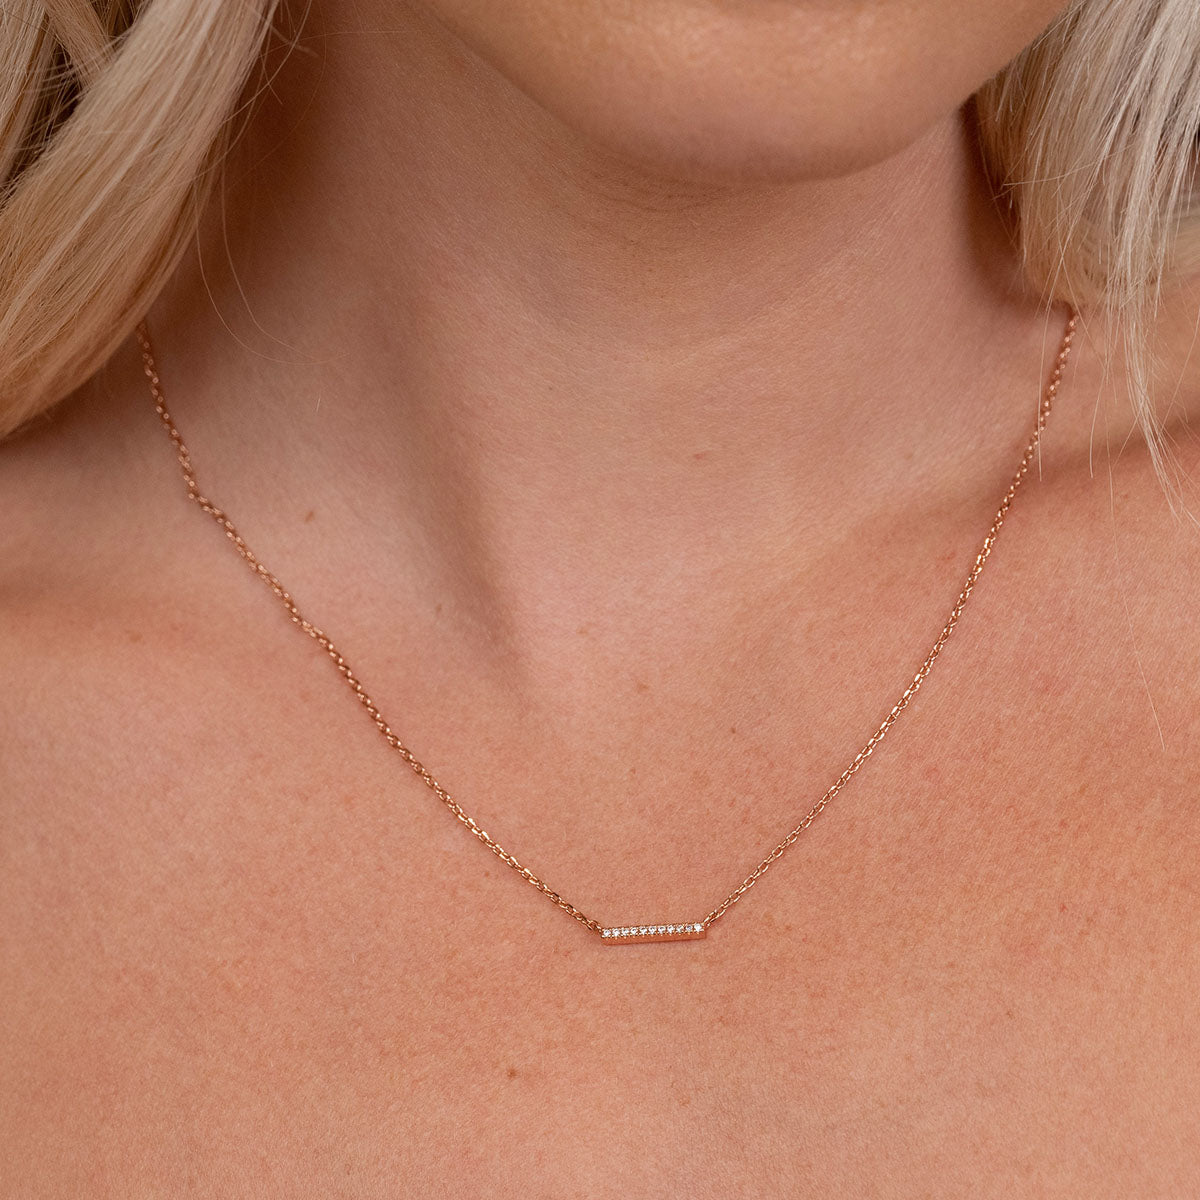 Cute rose gold bar necklace with stones